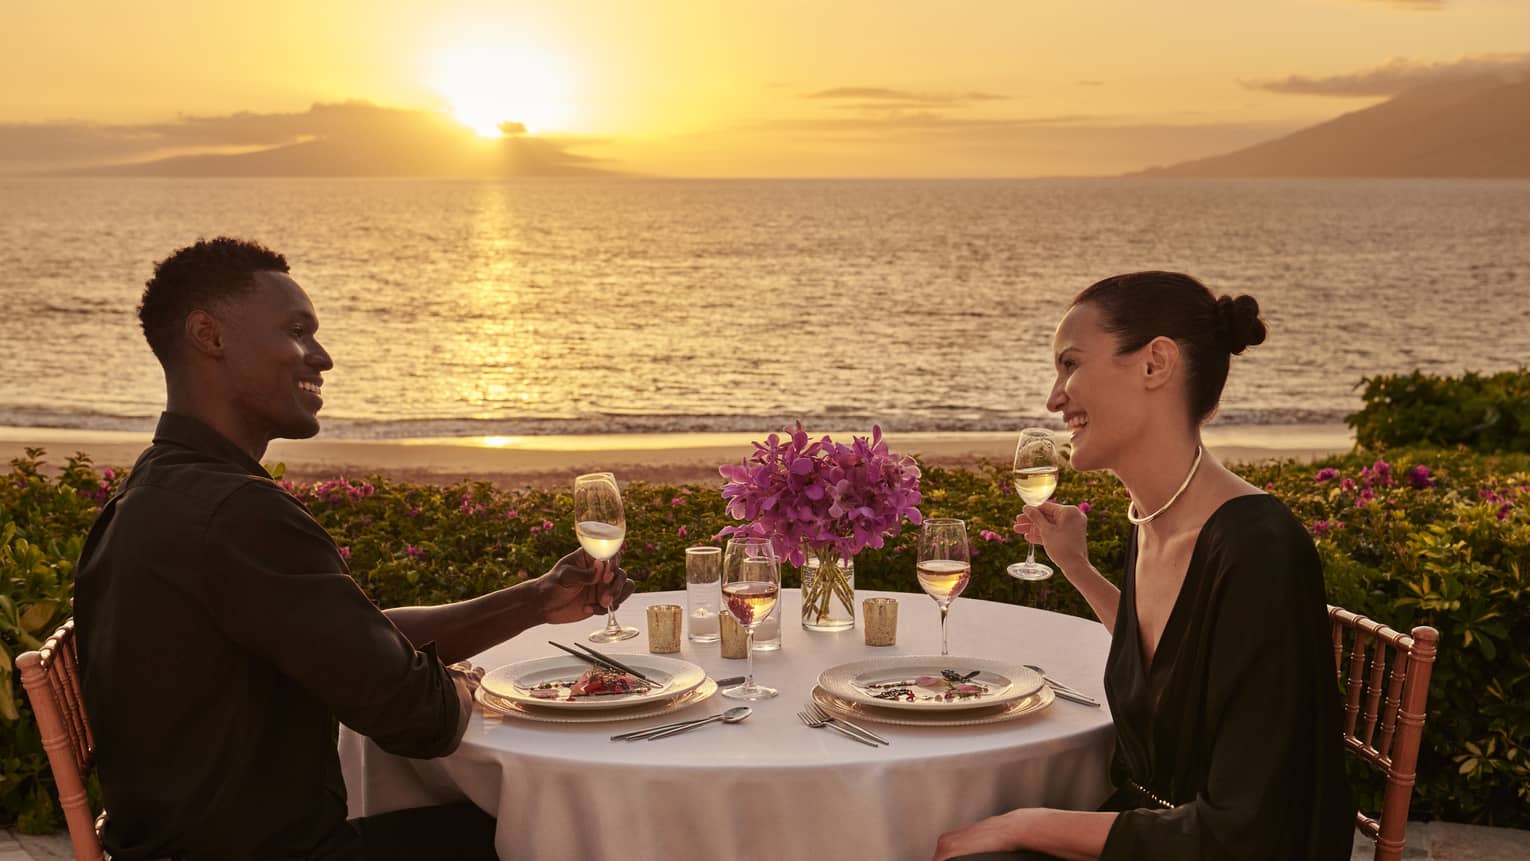 Man and woman at romantic dinner table with sunset and ocean view